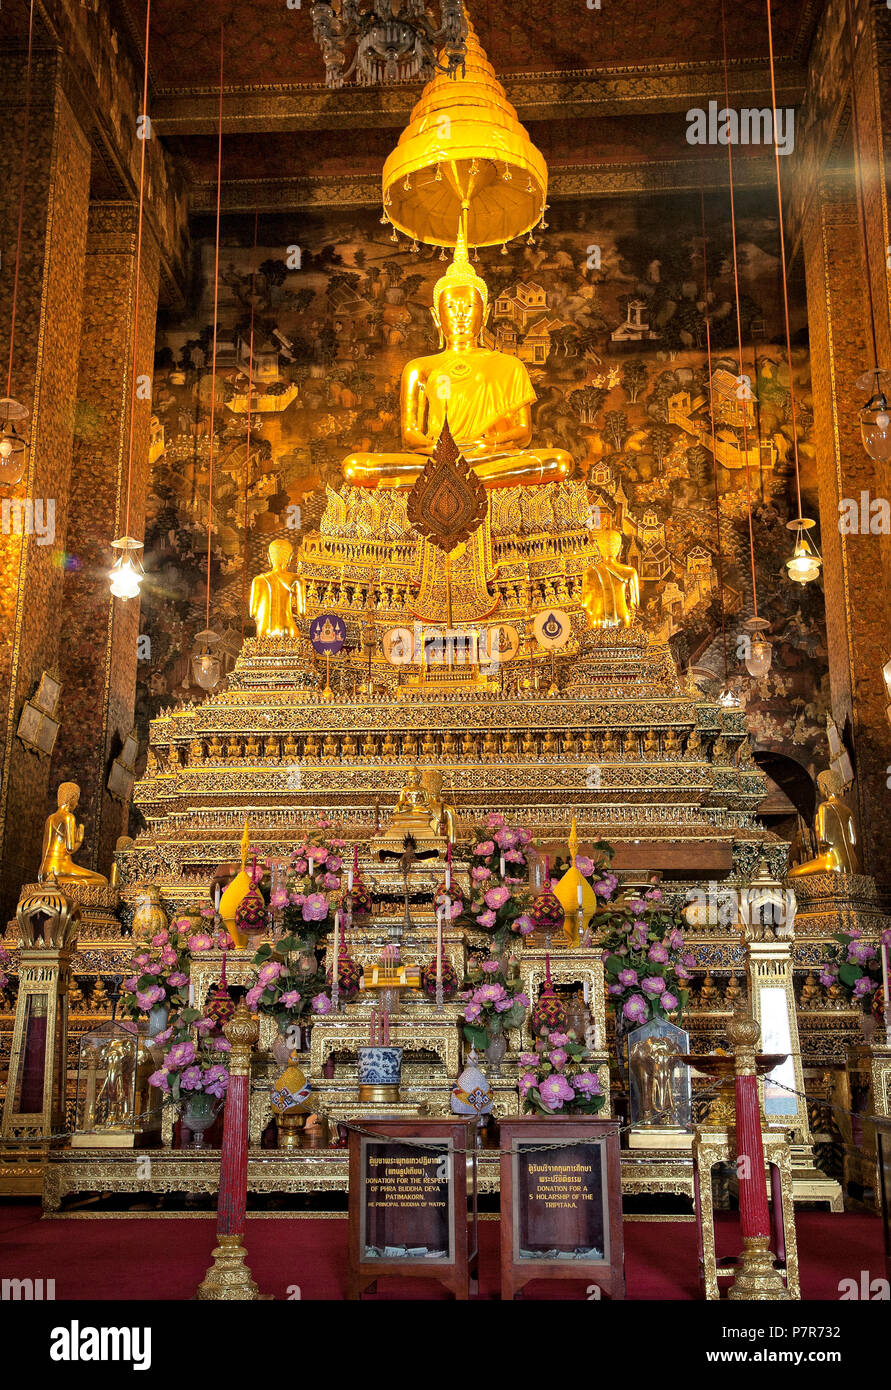 The alter and Buddha in one of the temples at Wat Pho, a Buddhist temple in Phra Nakhon district, Bangkok, Thailand.  Known also as the Temple of the  Stock Photo